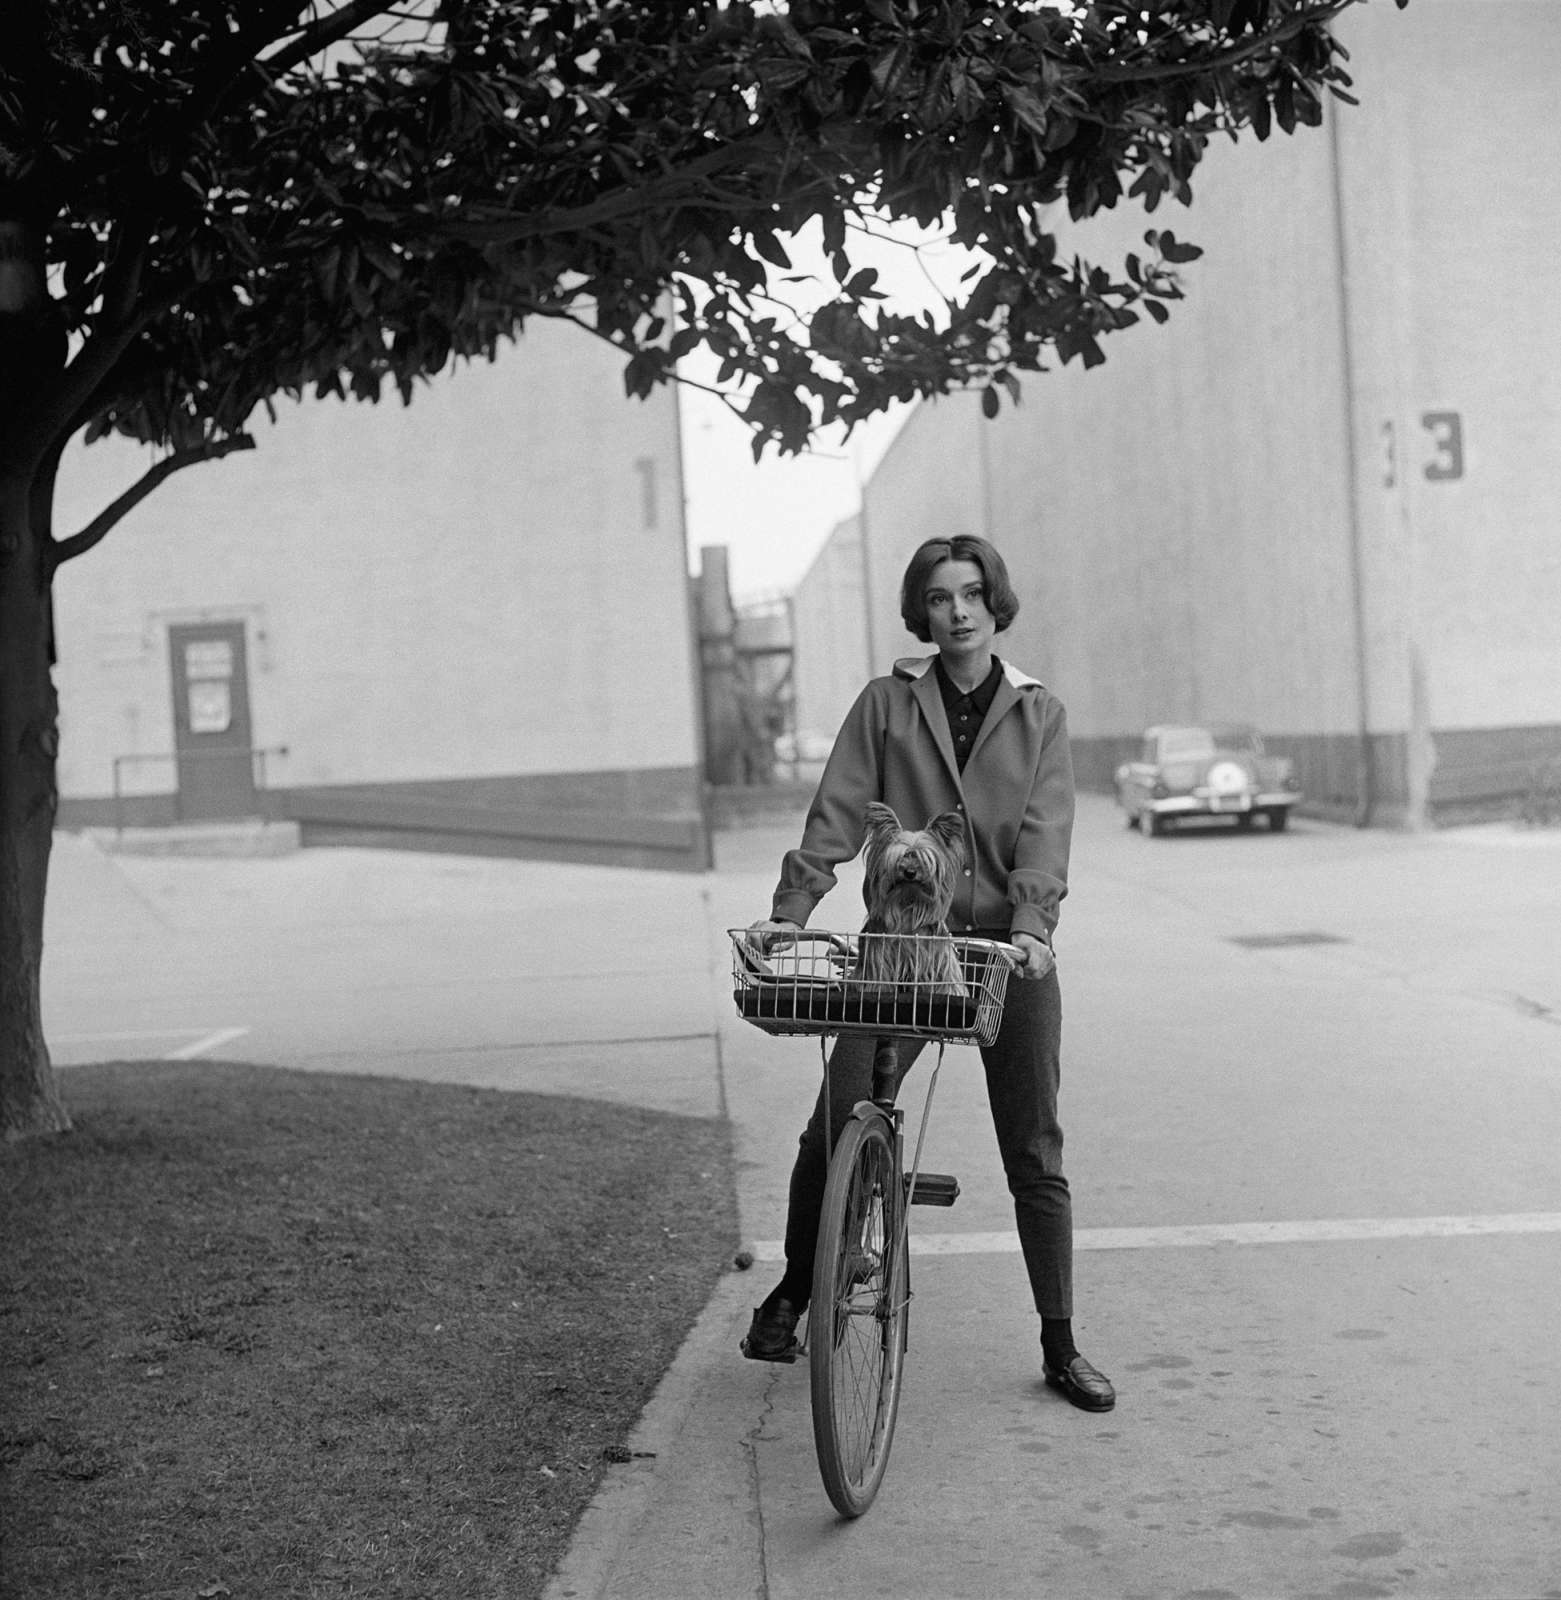 Motion Picture Television Archive, Sid Avery: Audrey Hepburn: On Her Bike with Her Dog Mr. Famous at Paramount Studios, 1957